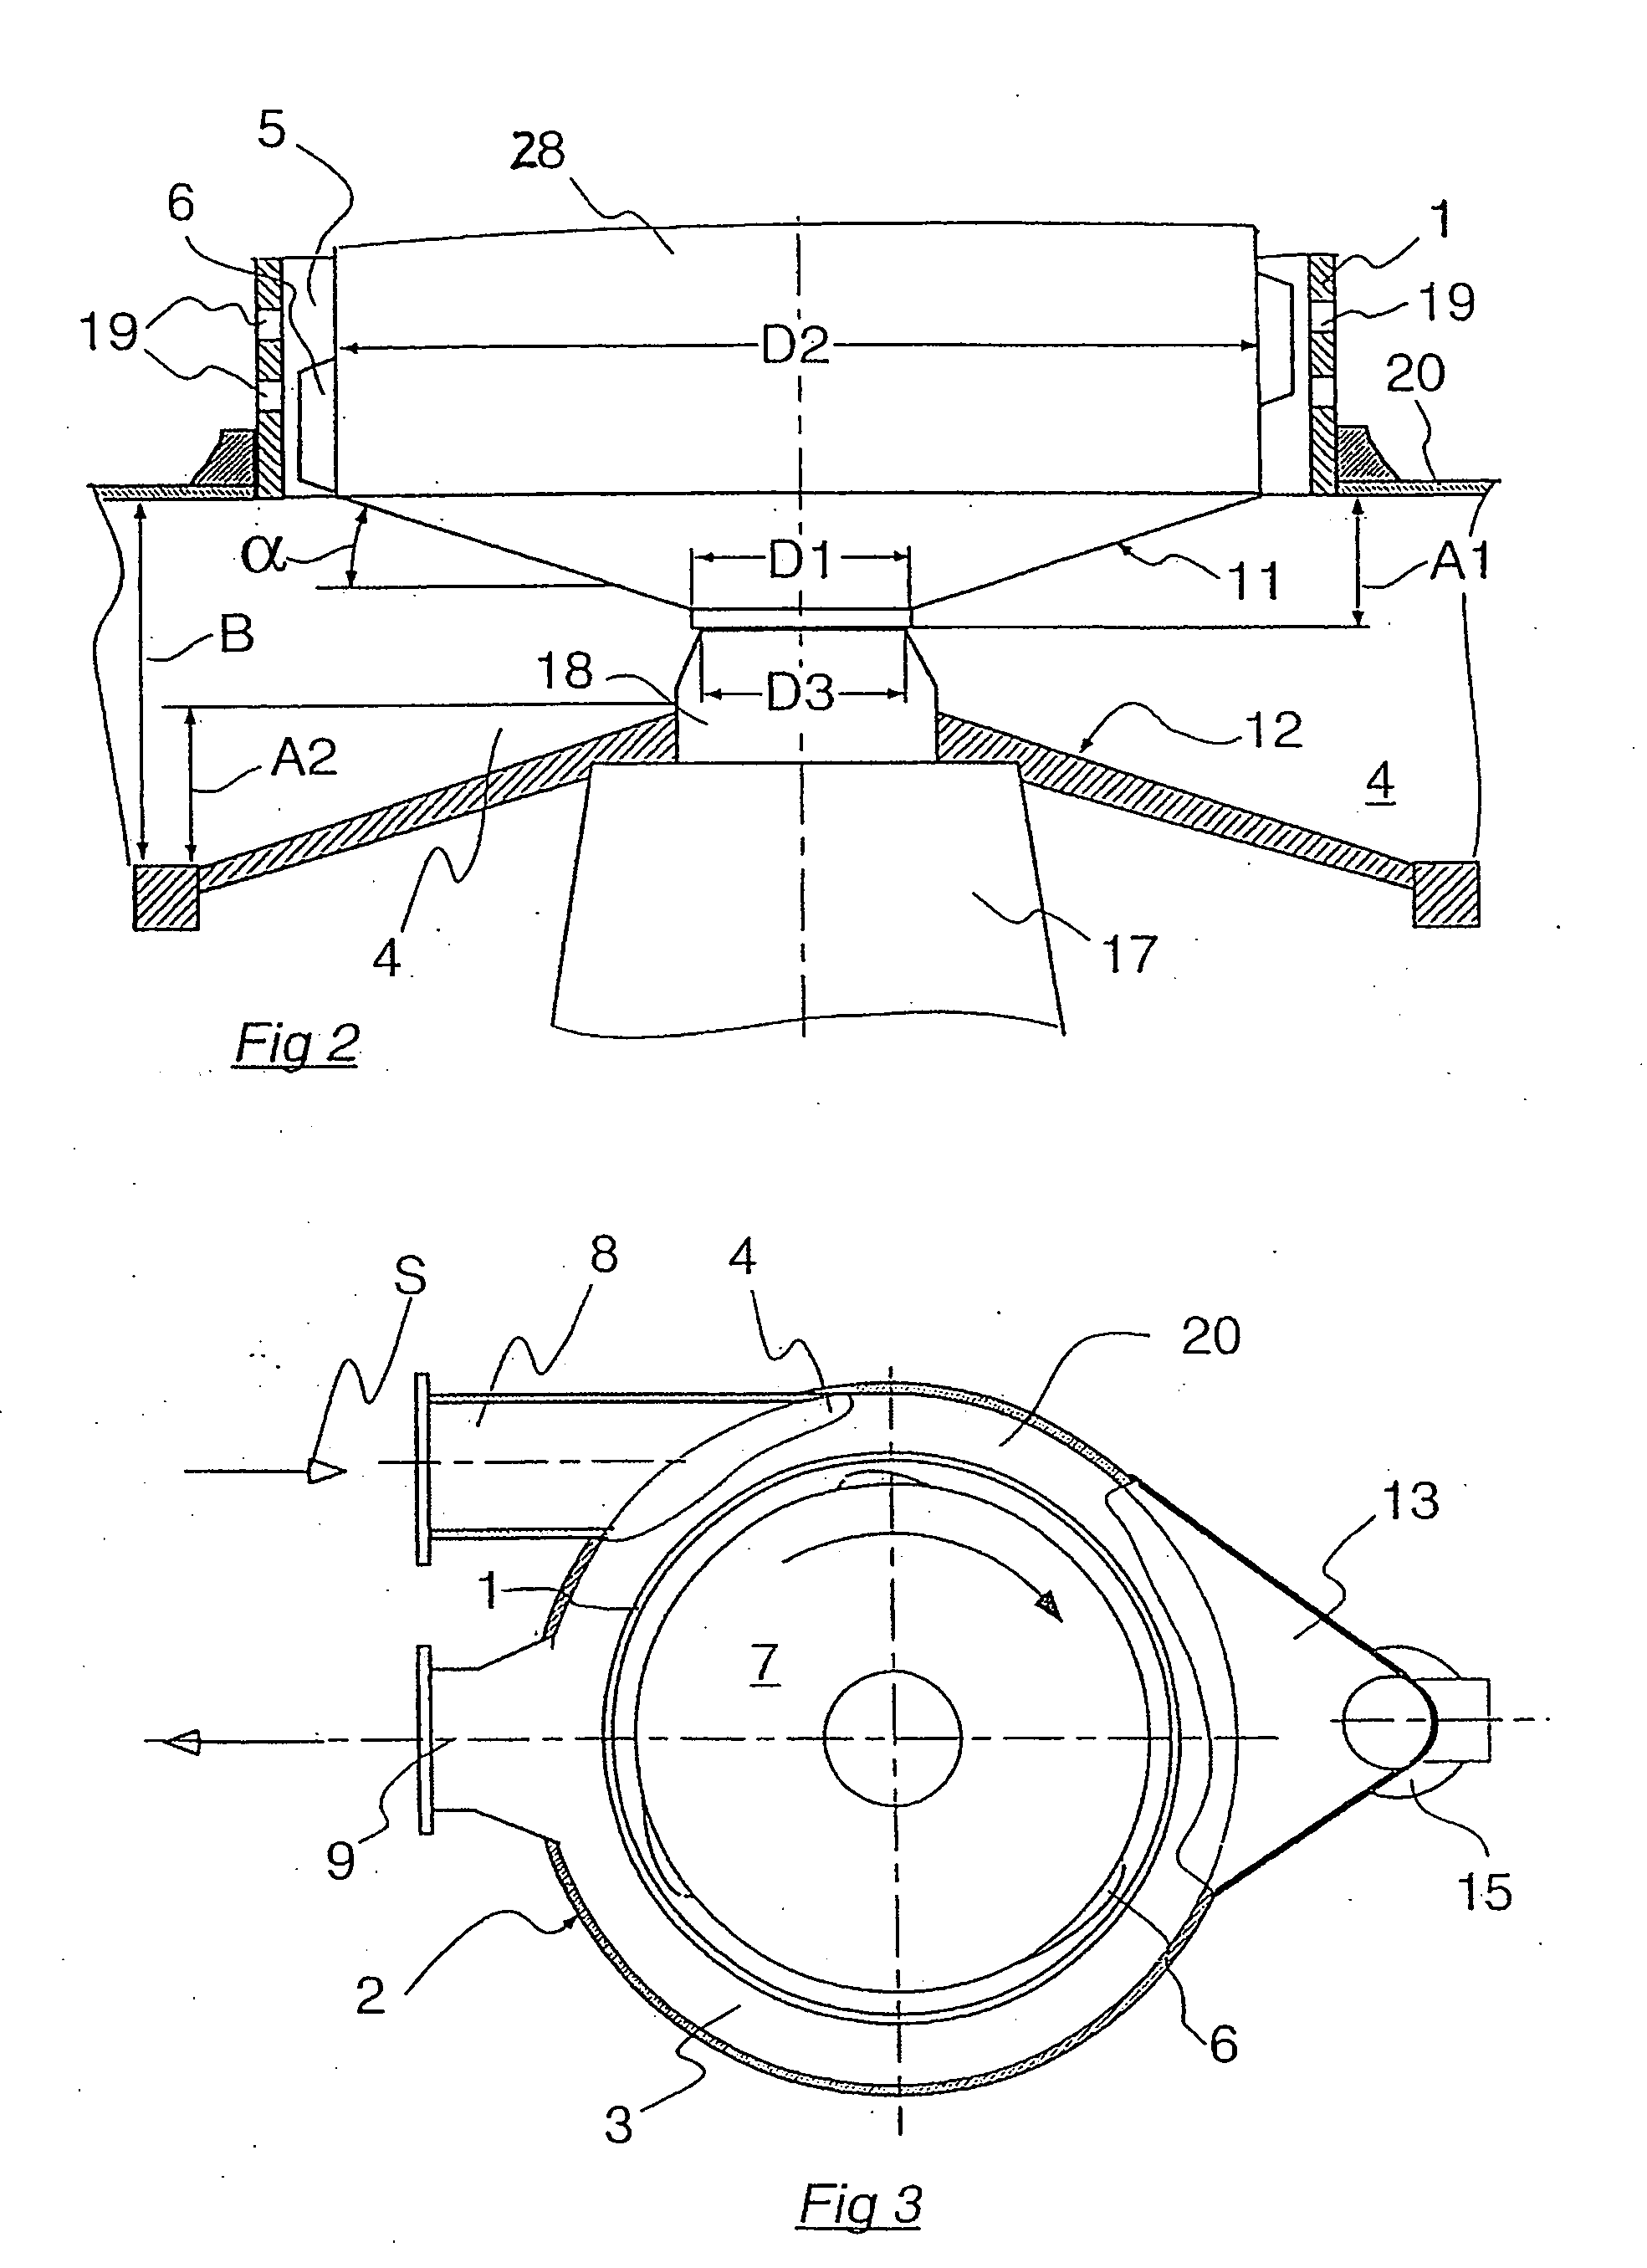 Pressurized screen for screening a fibrous suspension